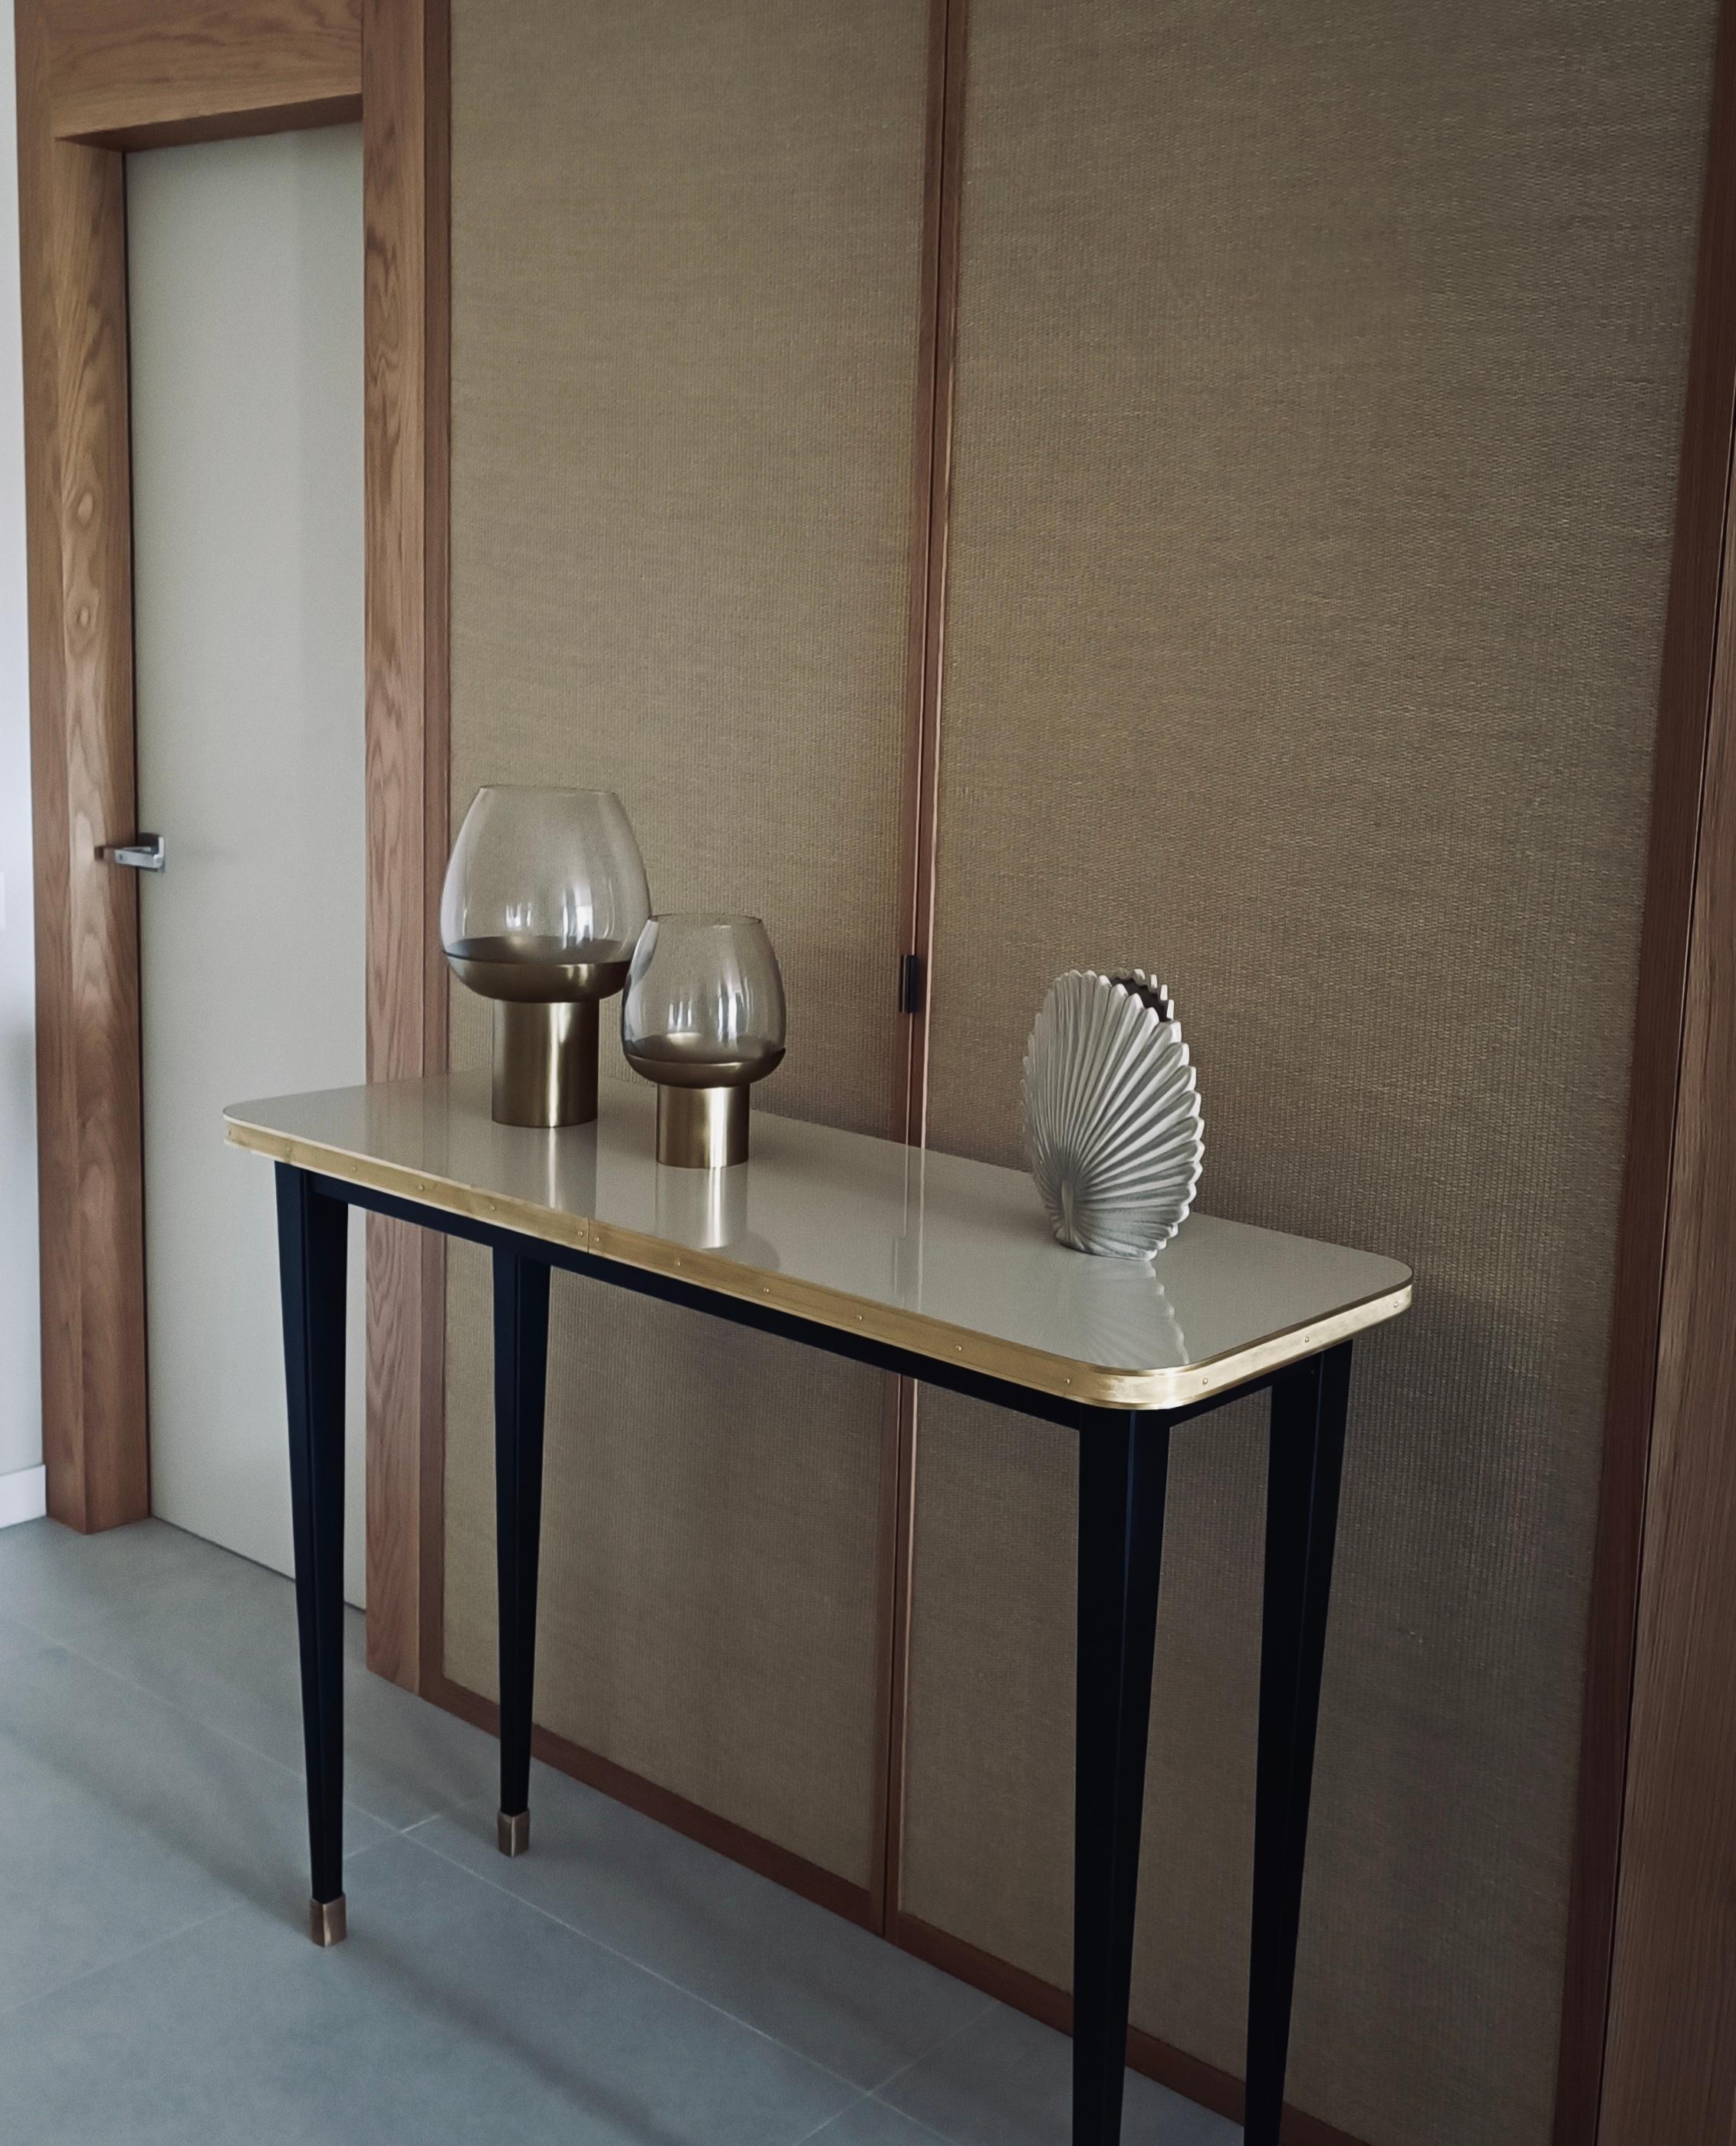 Console Table, High Gloss Laminate & Brass Details, Antique White - L In New Condition For Sale In Alcoy, Alicante